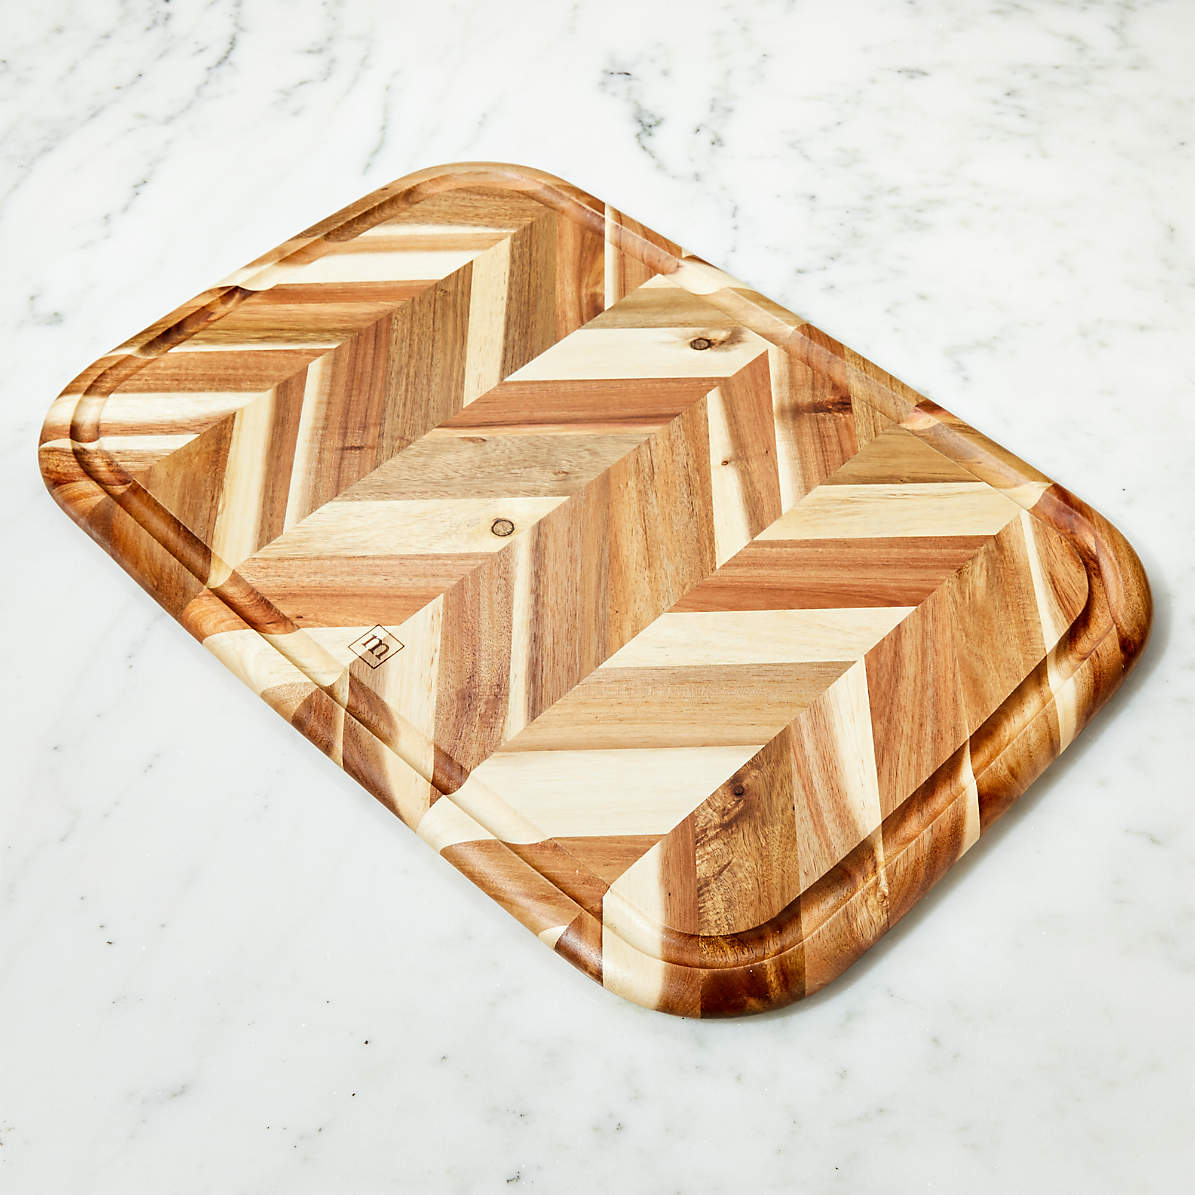 Madeira Extra Large Wood Carving Board - Shop Cutting Boards at H-E-B